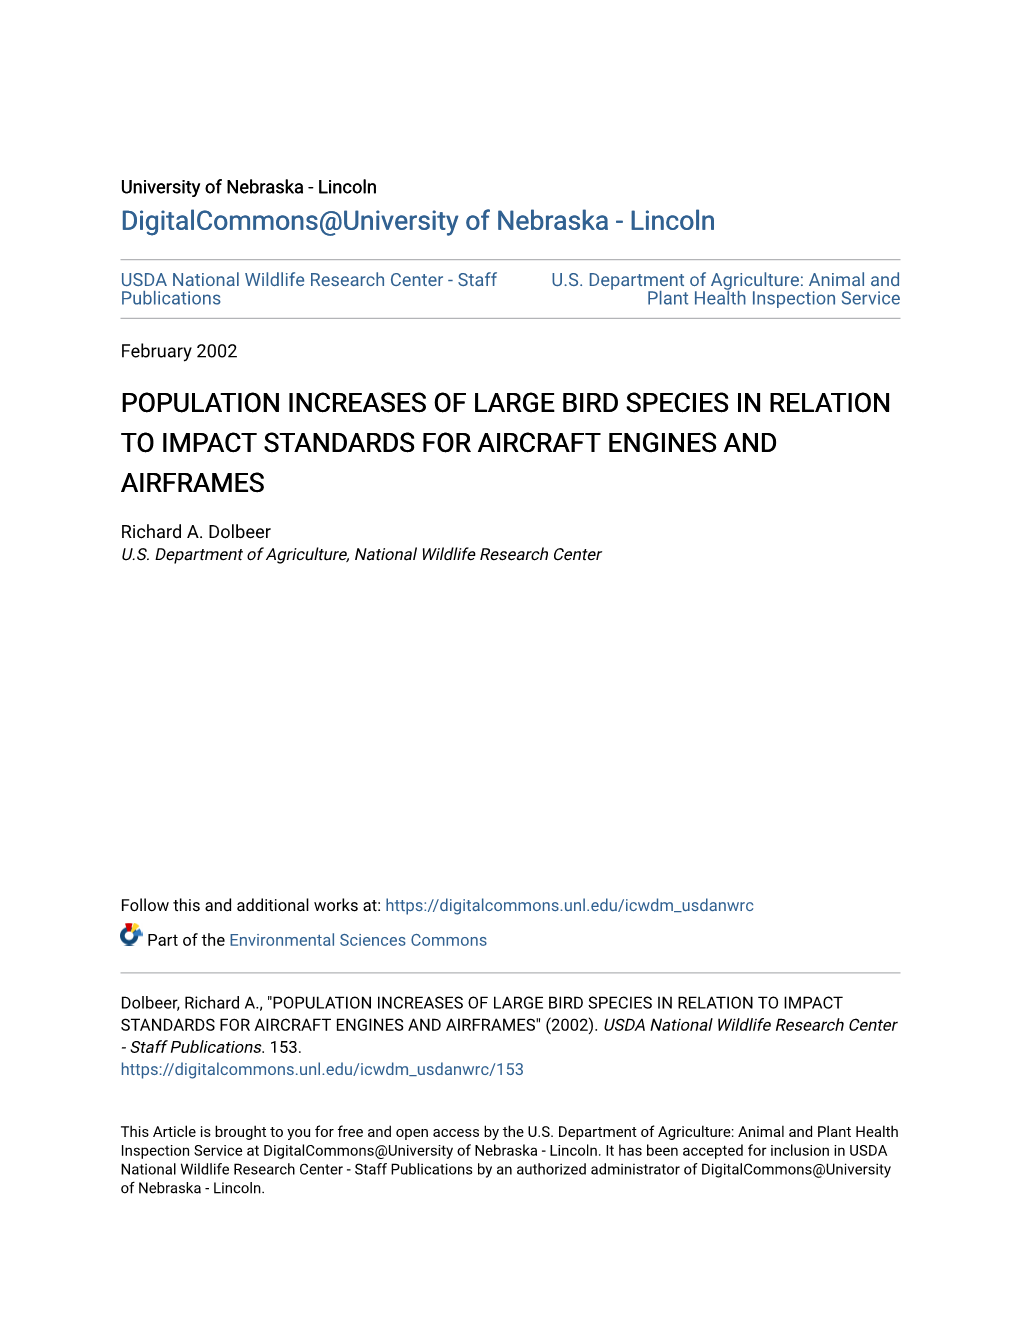 Population Increases of Large Bird Species in Relation to Impact Standards for Aircraft Engines and Airframes